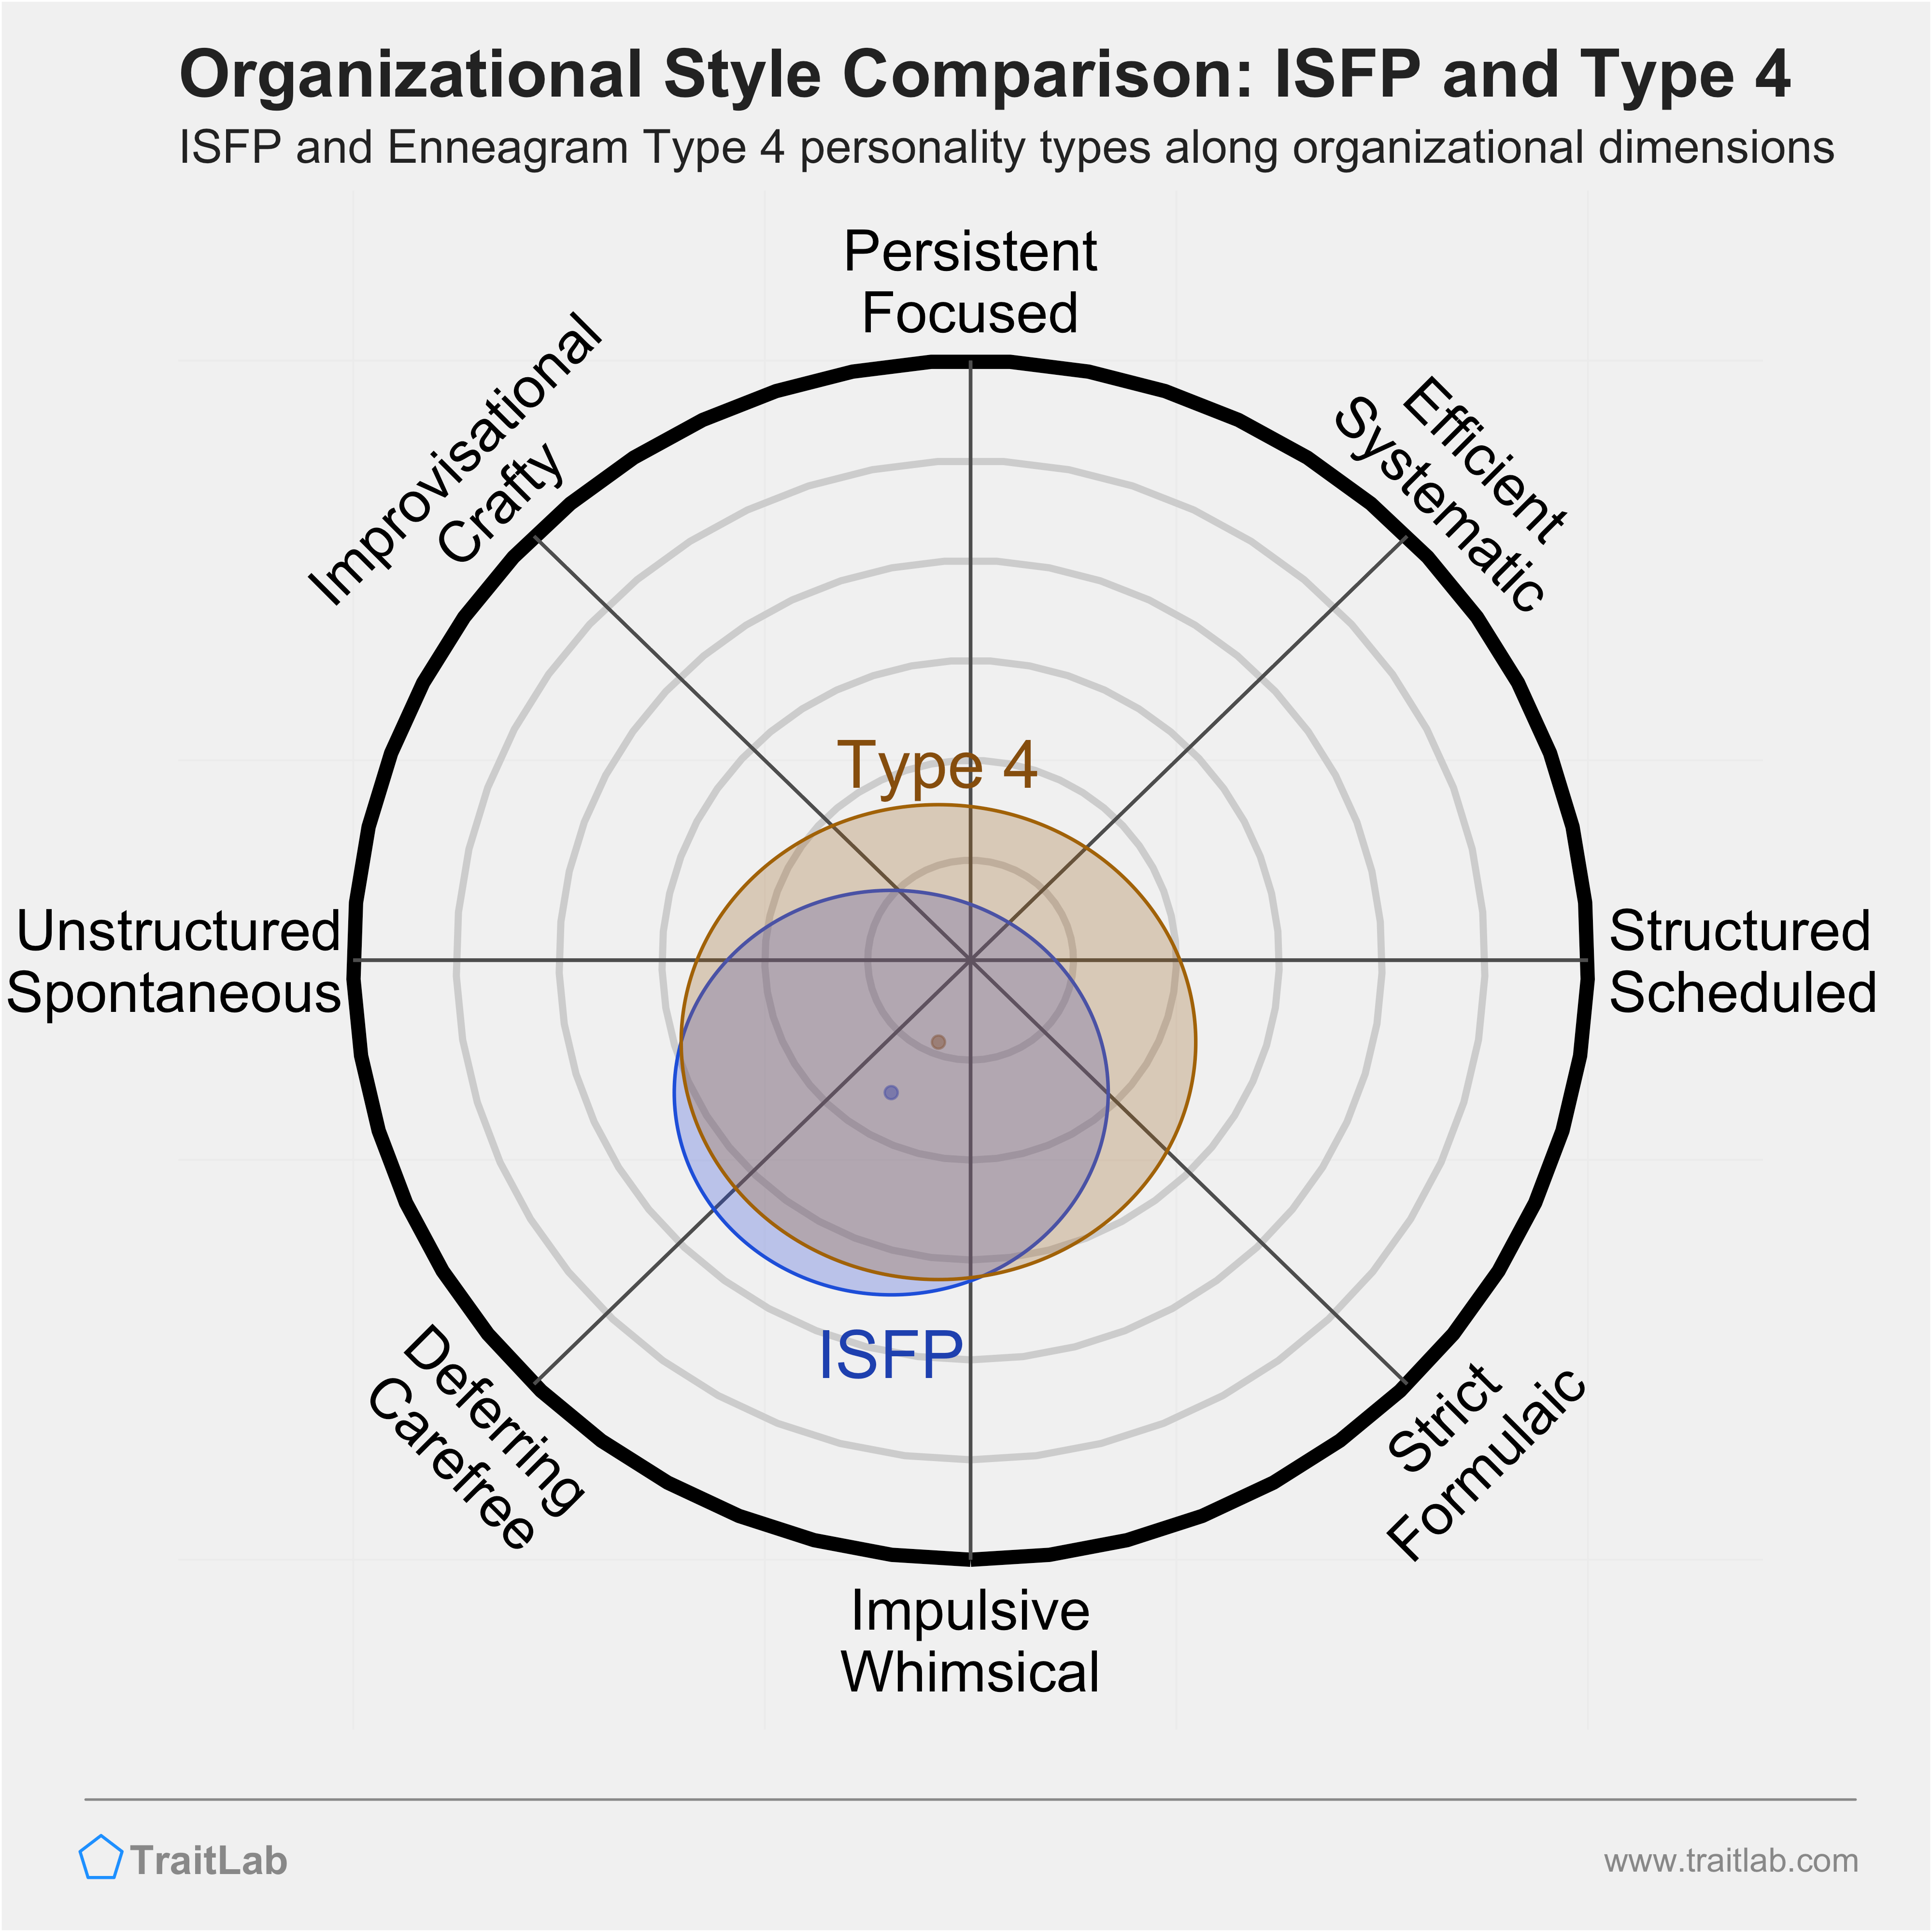 ISFP and Type 4 comparison across organizational dimensions